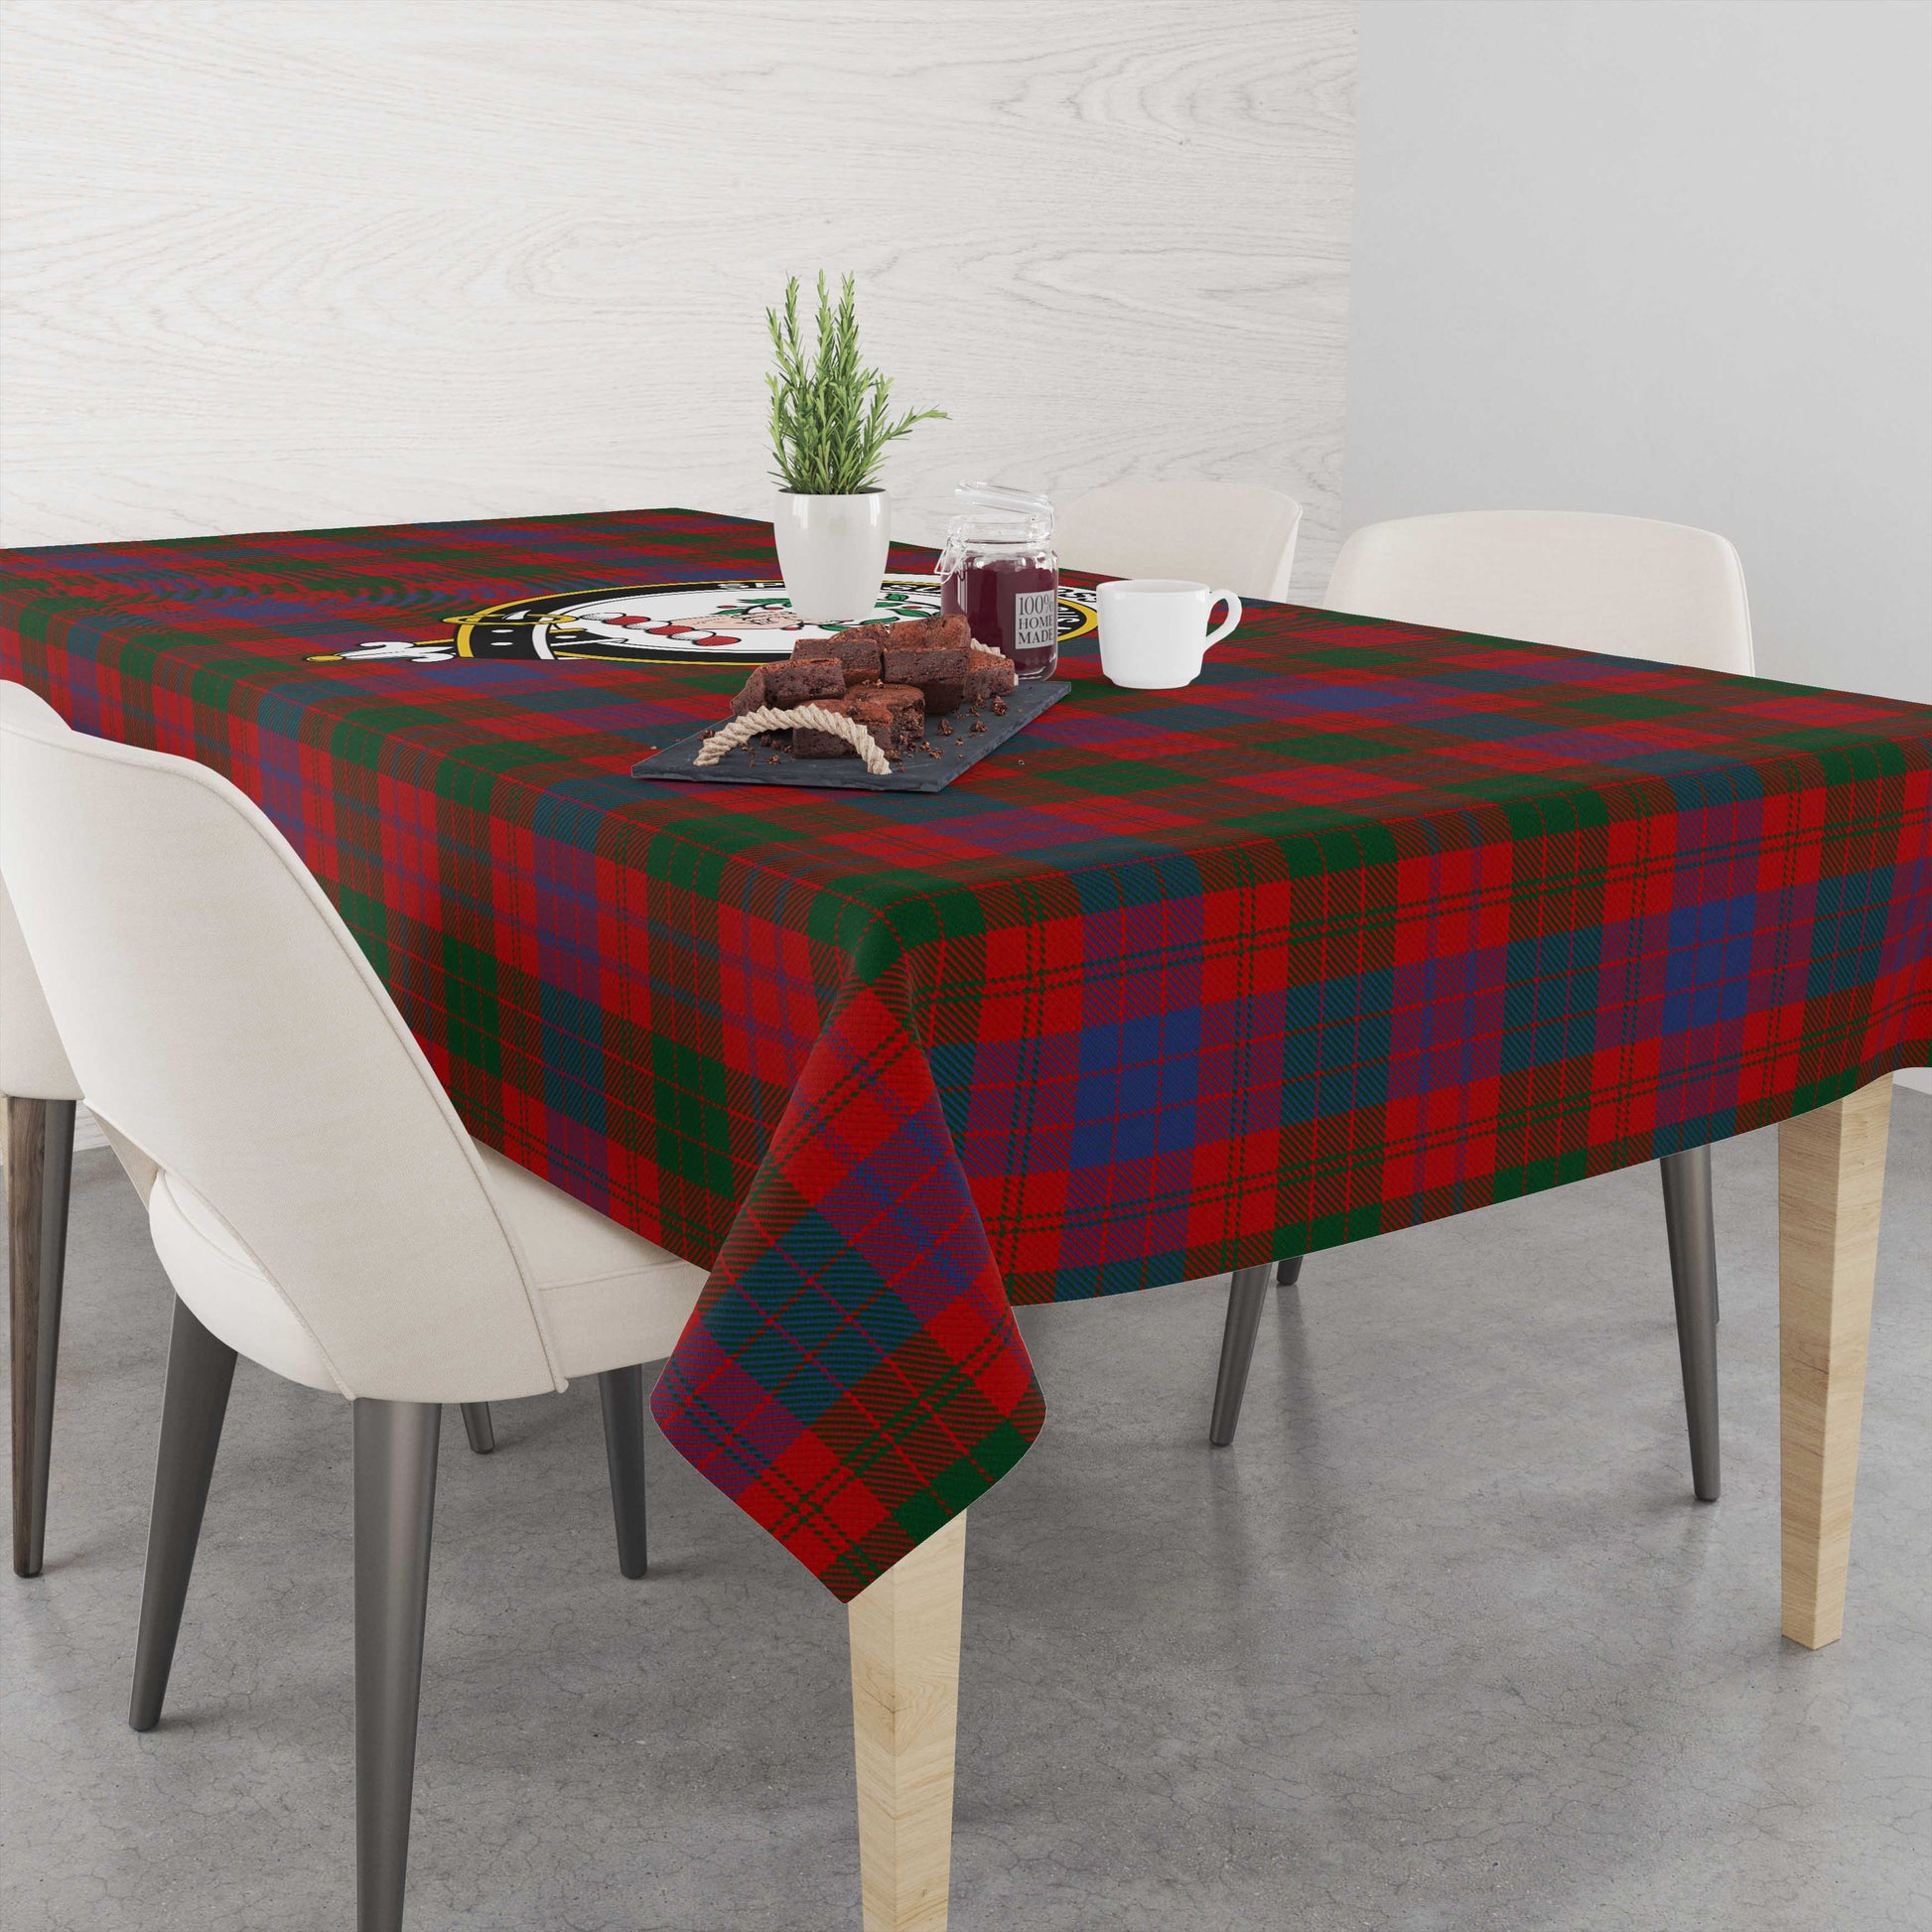 ross-tatan-tablecloth-with-family-crest